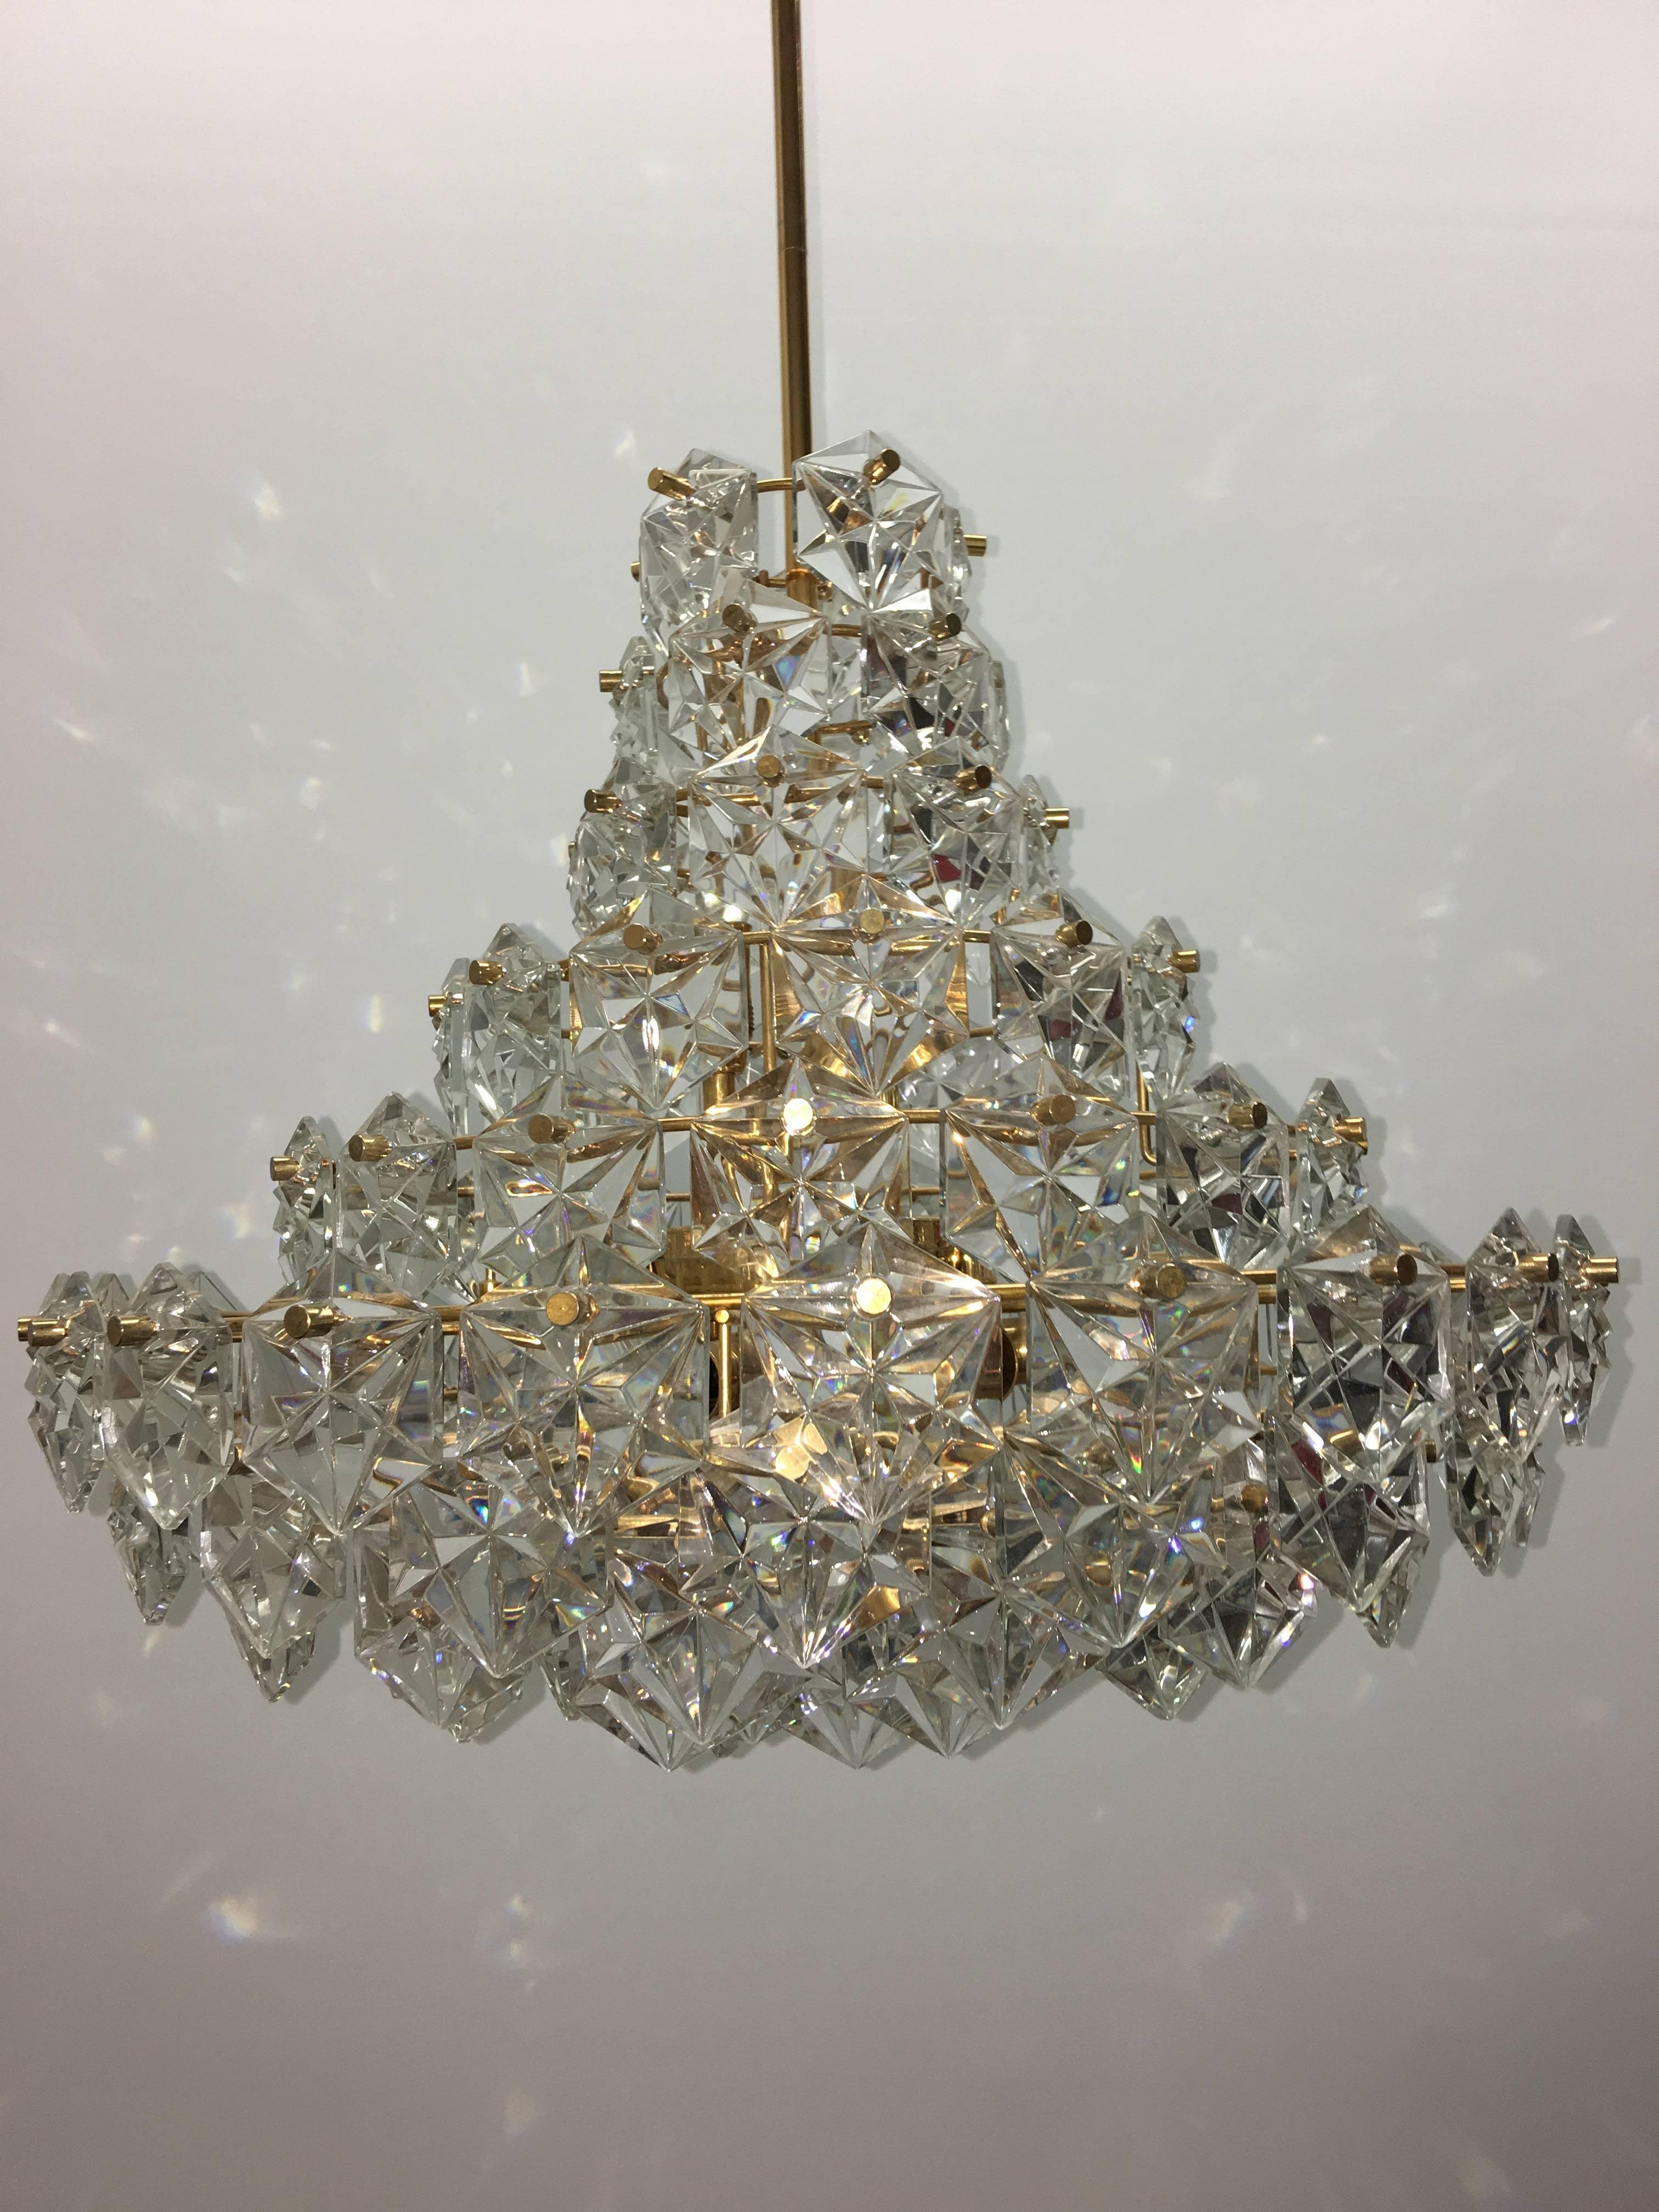 Faceted hexagonal crystal chandelier with gold colored hardware made by German maker, Kinkeldey. The chandelier requires nine European E14 candelabra bulbs, each bulb up to 40 watts. It also needs one E 27 Edison bulb up to 60 watts. Very warm in